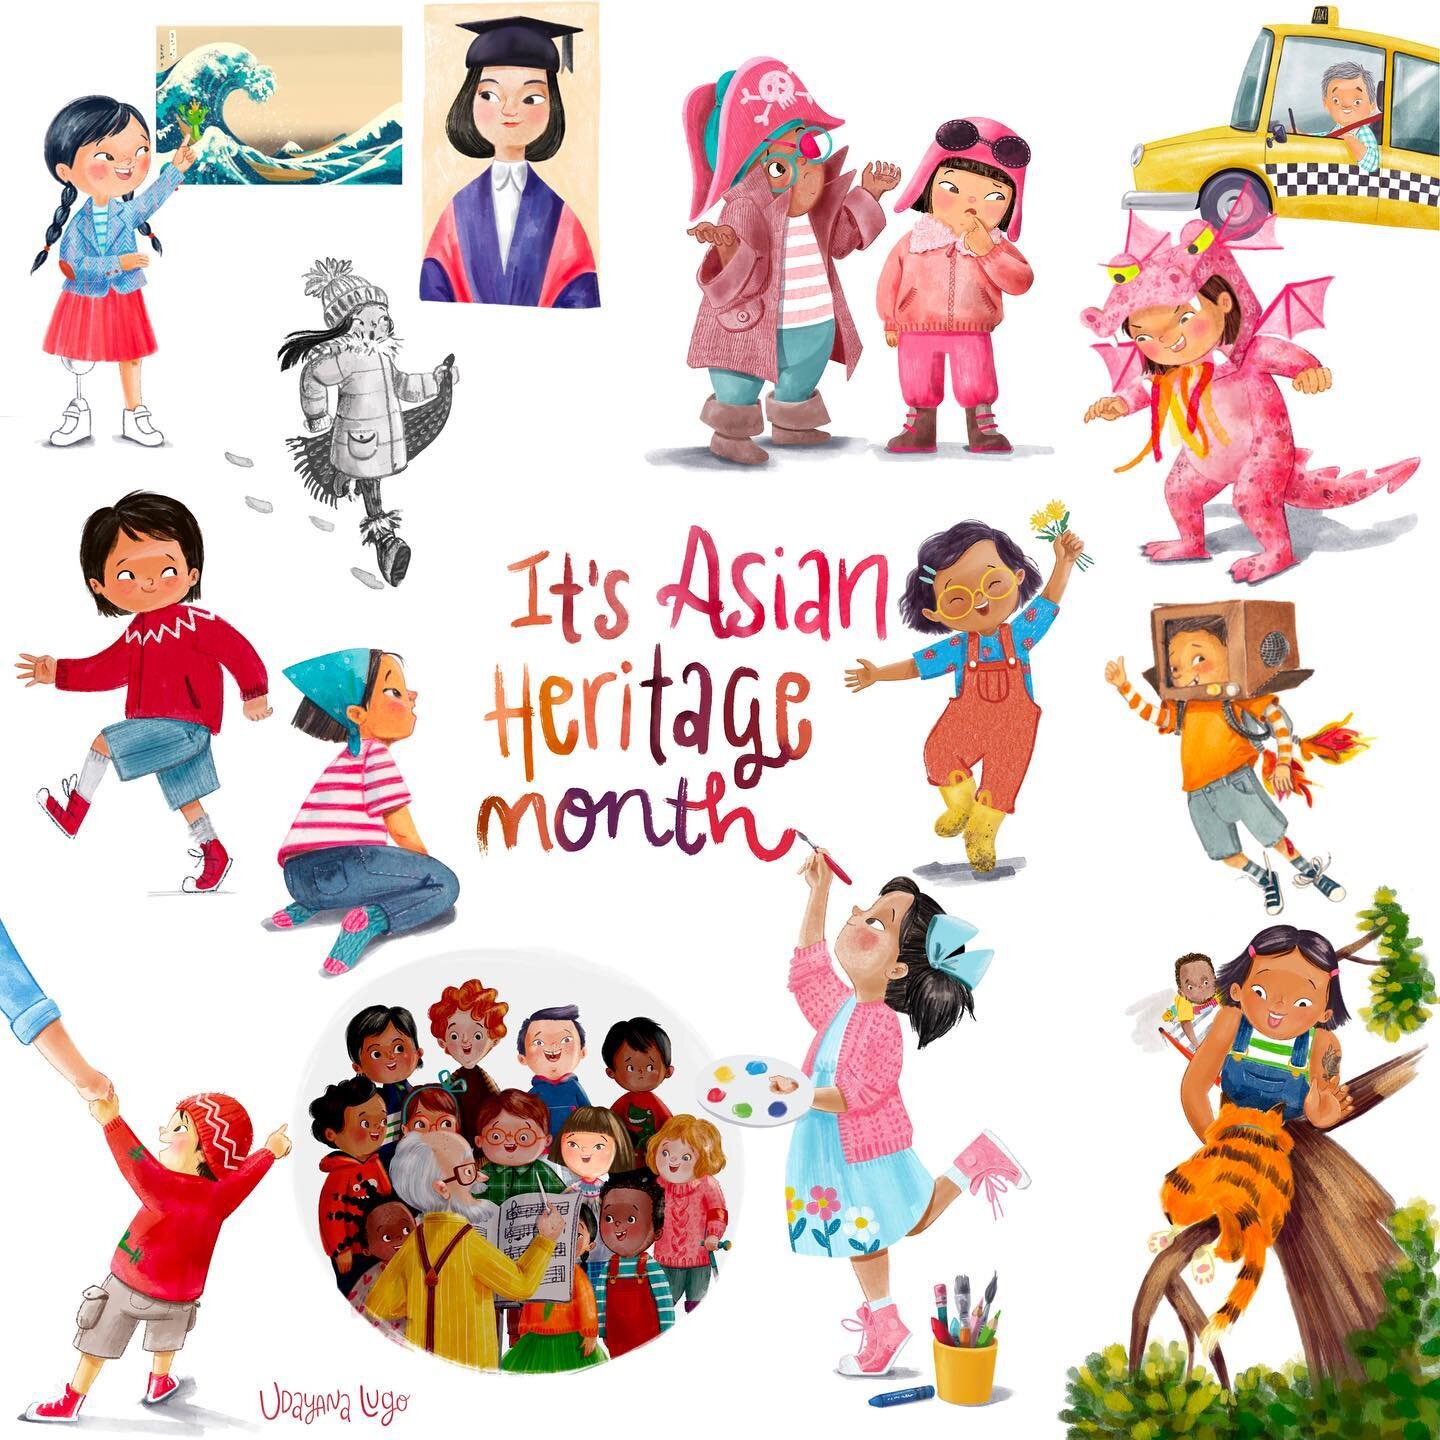 Hello folks! May is Asian heritage month in Canada, so I&rsquo;m going to share a few things about this. 
This is an incomplete sample of Asian characters that I have done, either by my own initiative or by request.

#kidlitart #kidlitillustration #A